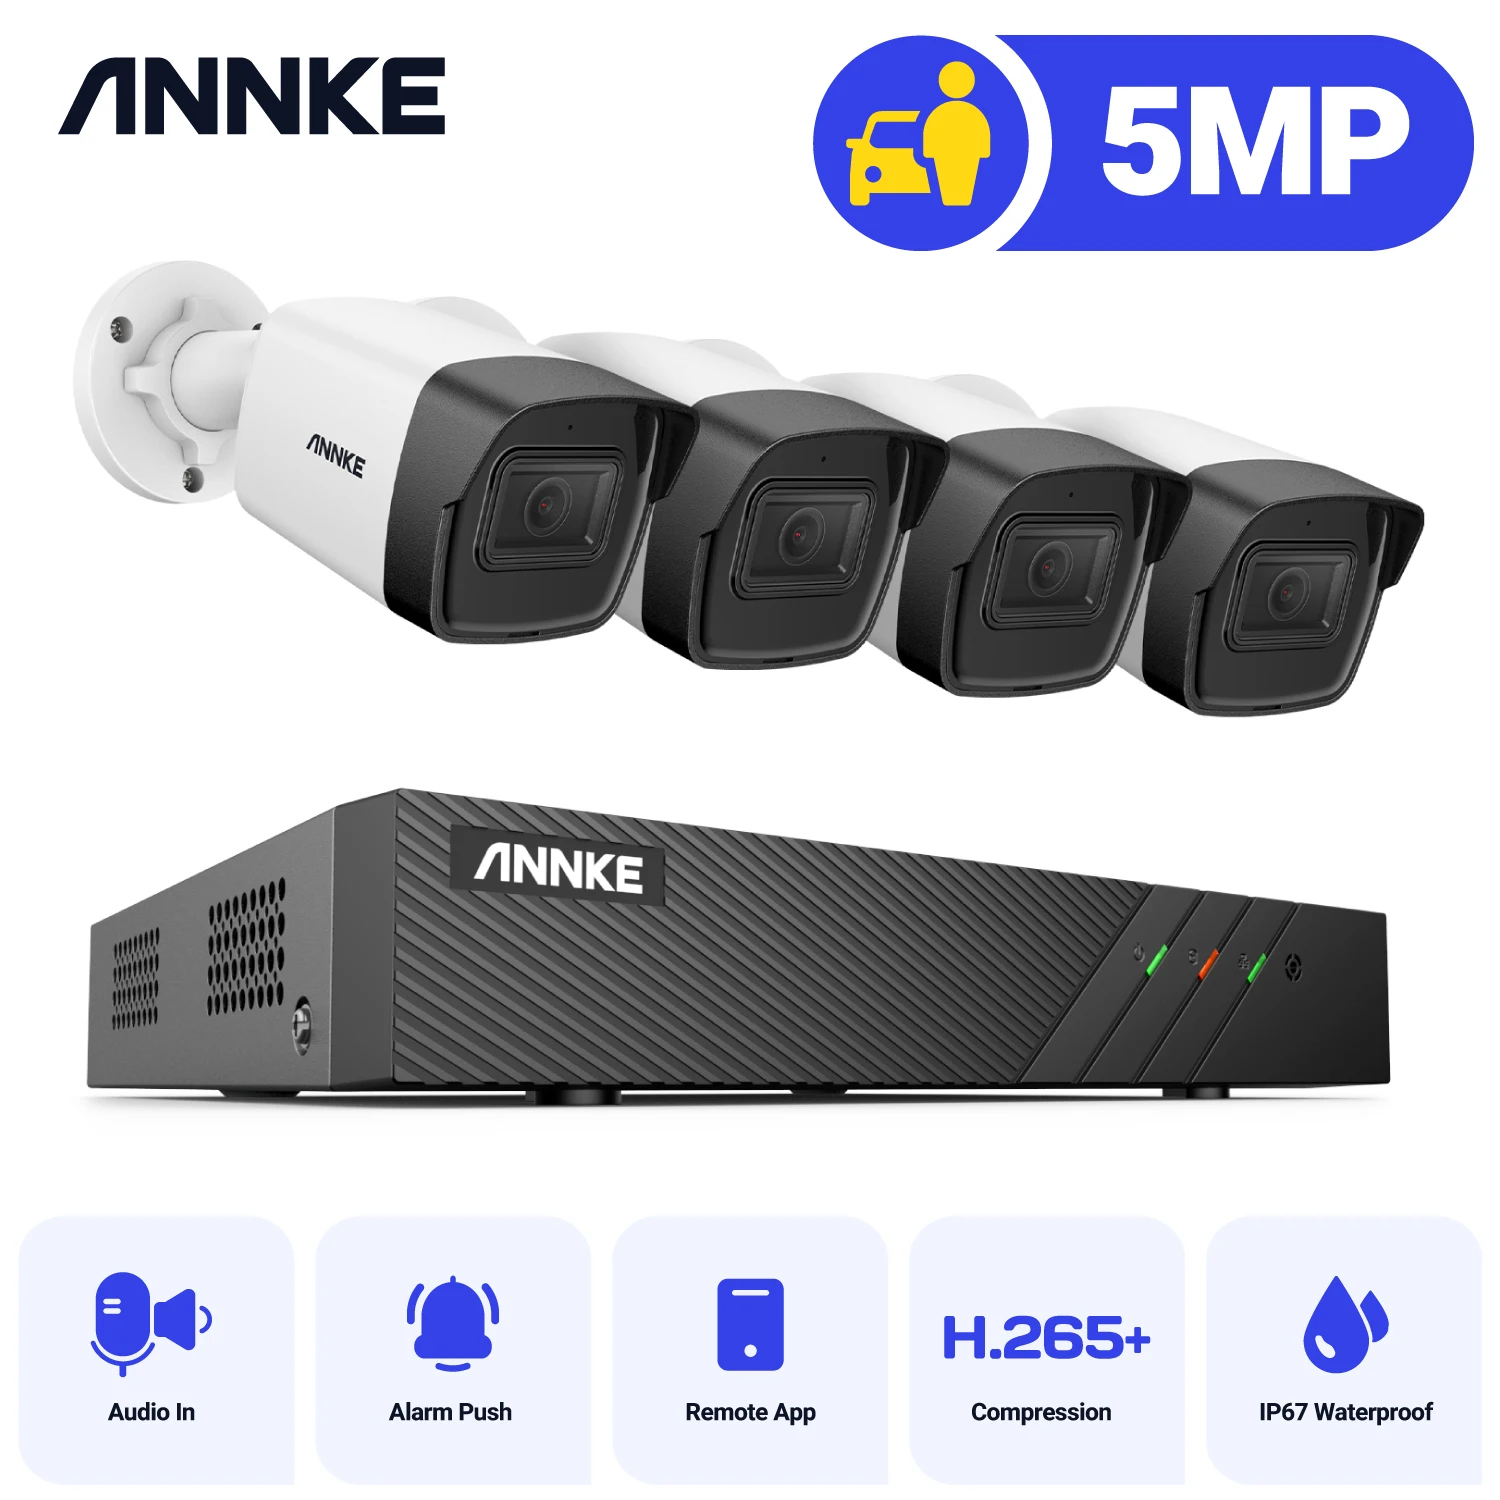 

ANNKE 5MP 8 Channel PoE Security System with 4 Bullet Cameras,EXIR Night Vision H.265+ Support IP67 Weatherproof CCTV Camera Kit